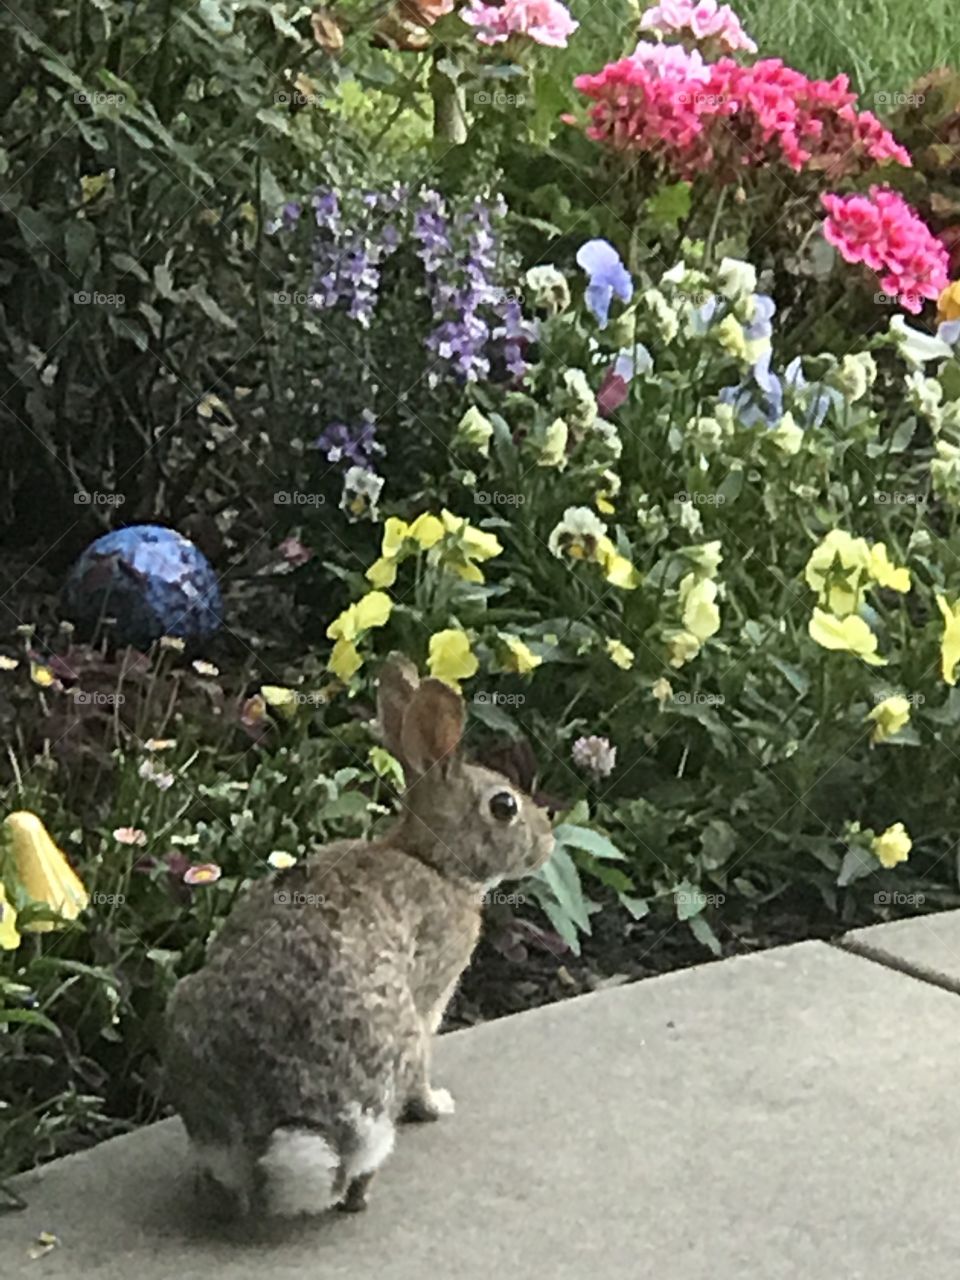 Bunny Rabbit visits my flourishing flower garden for his evening meal